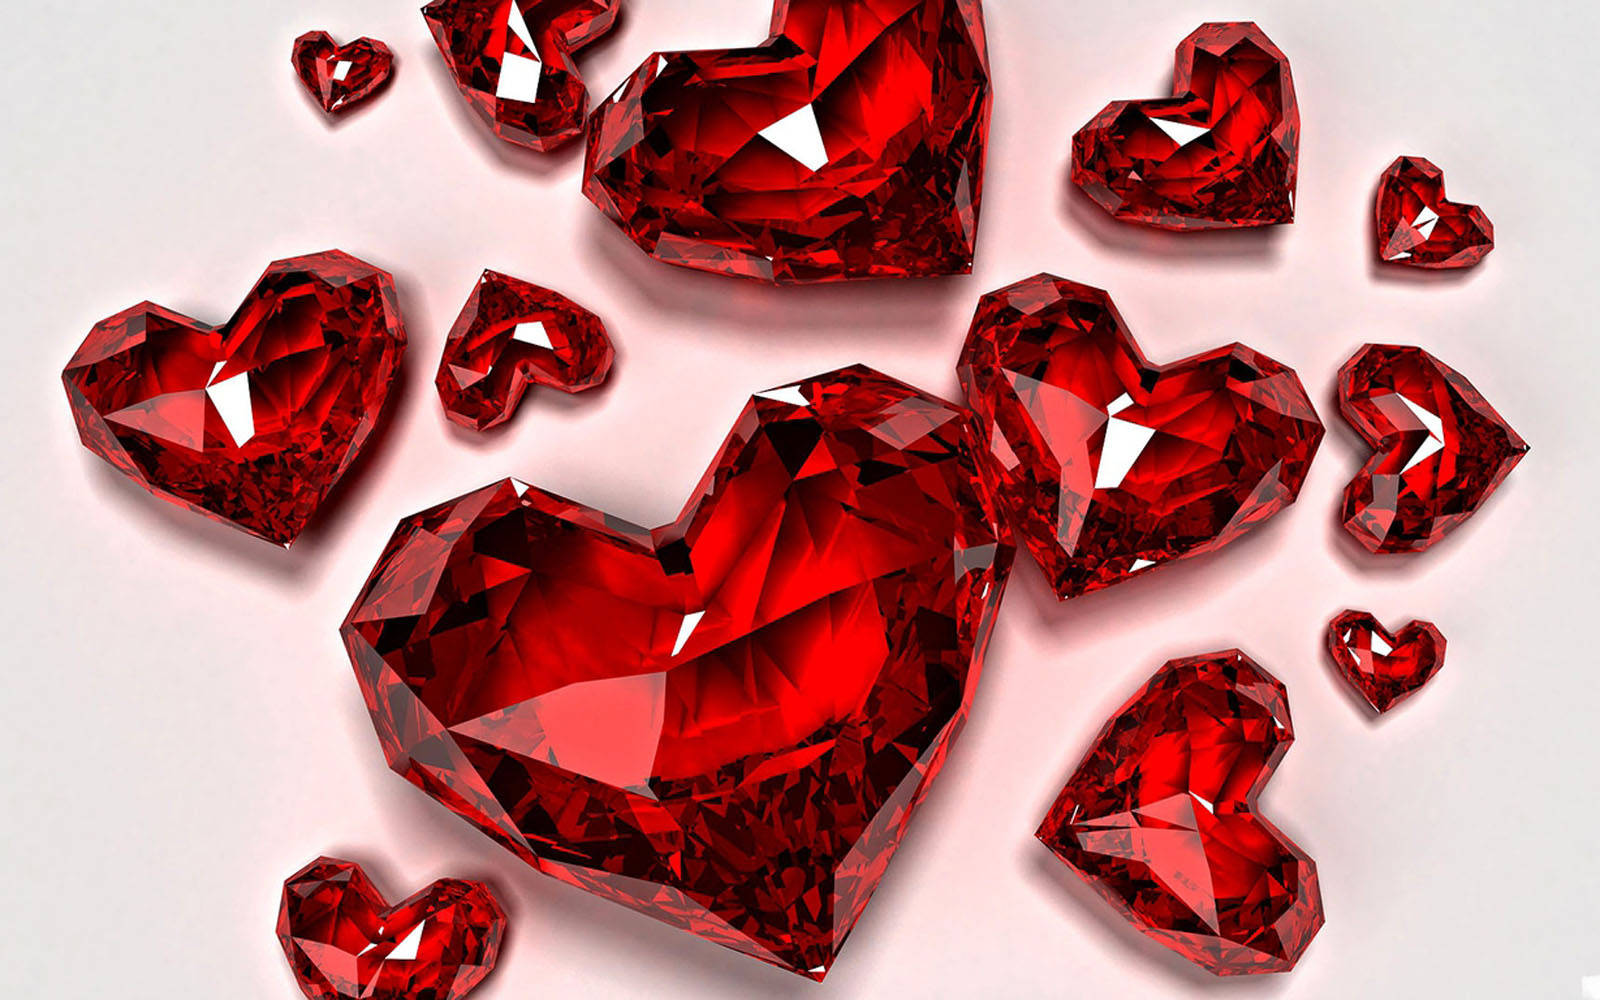 Red Crystal Glam Hearts Background